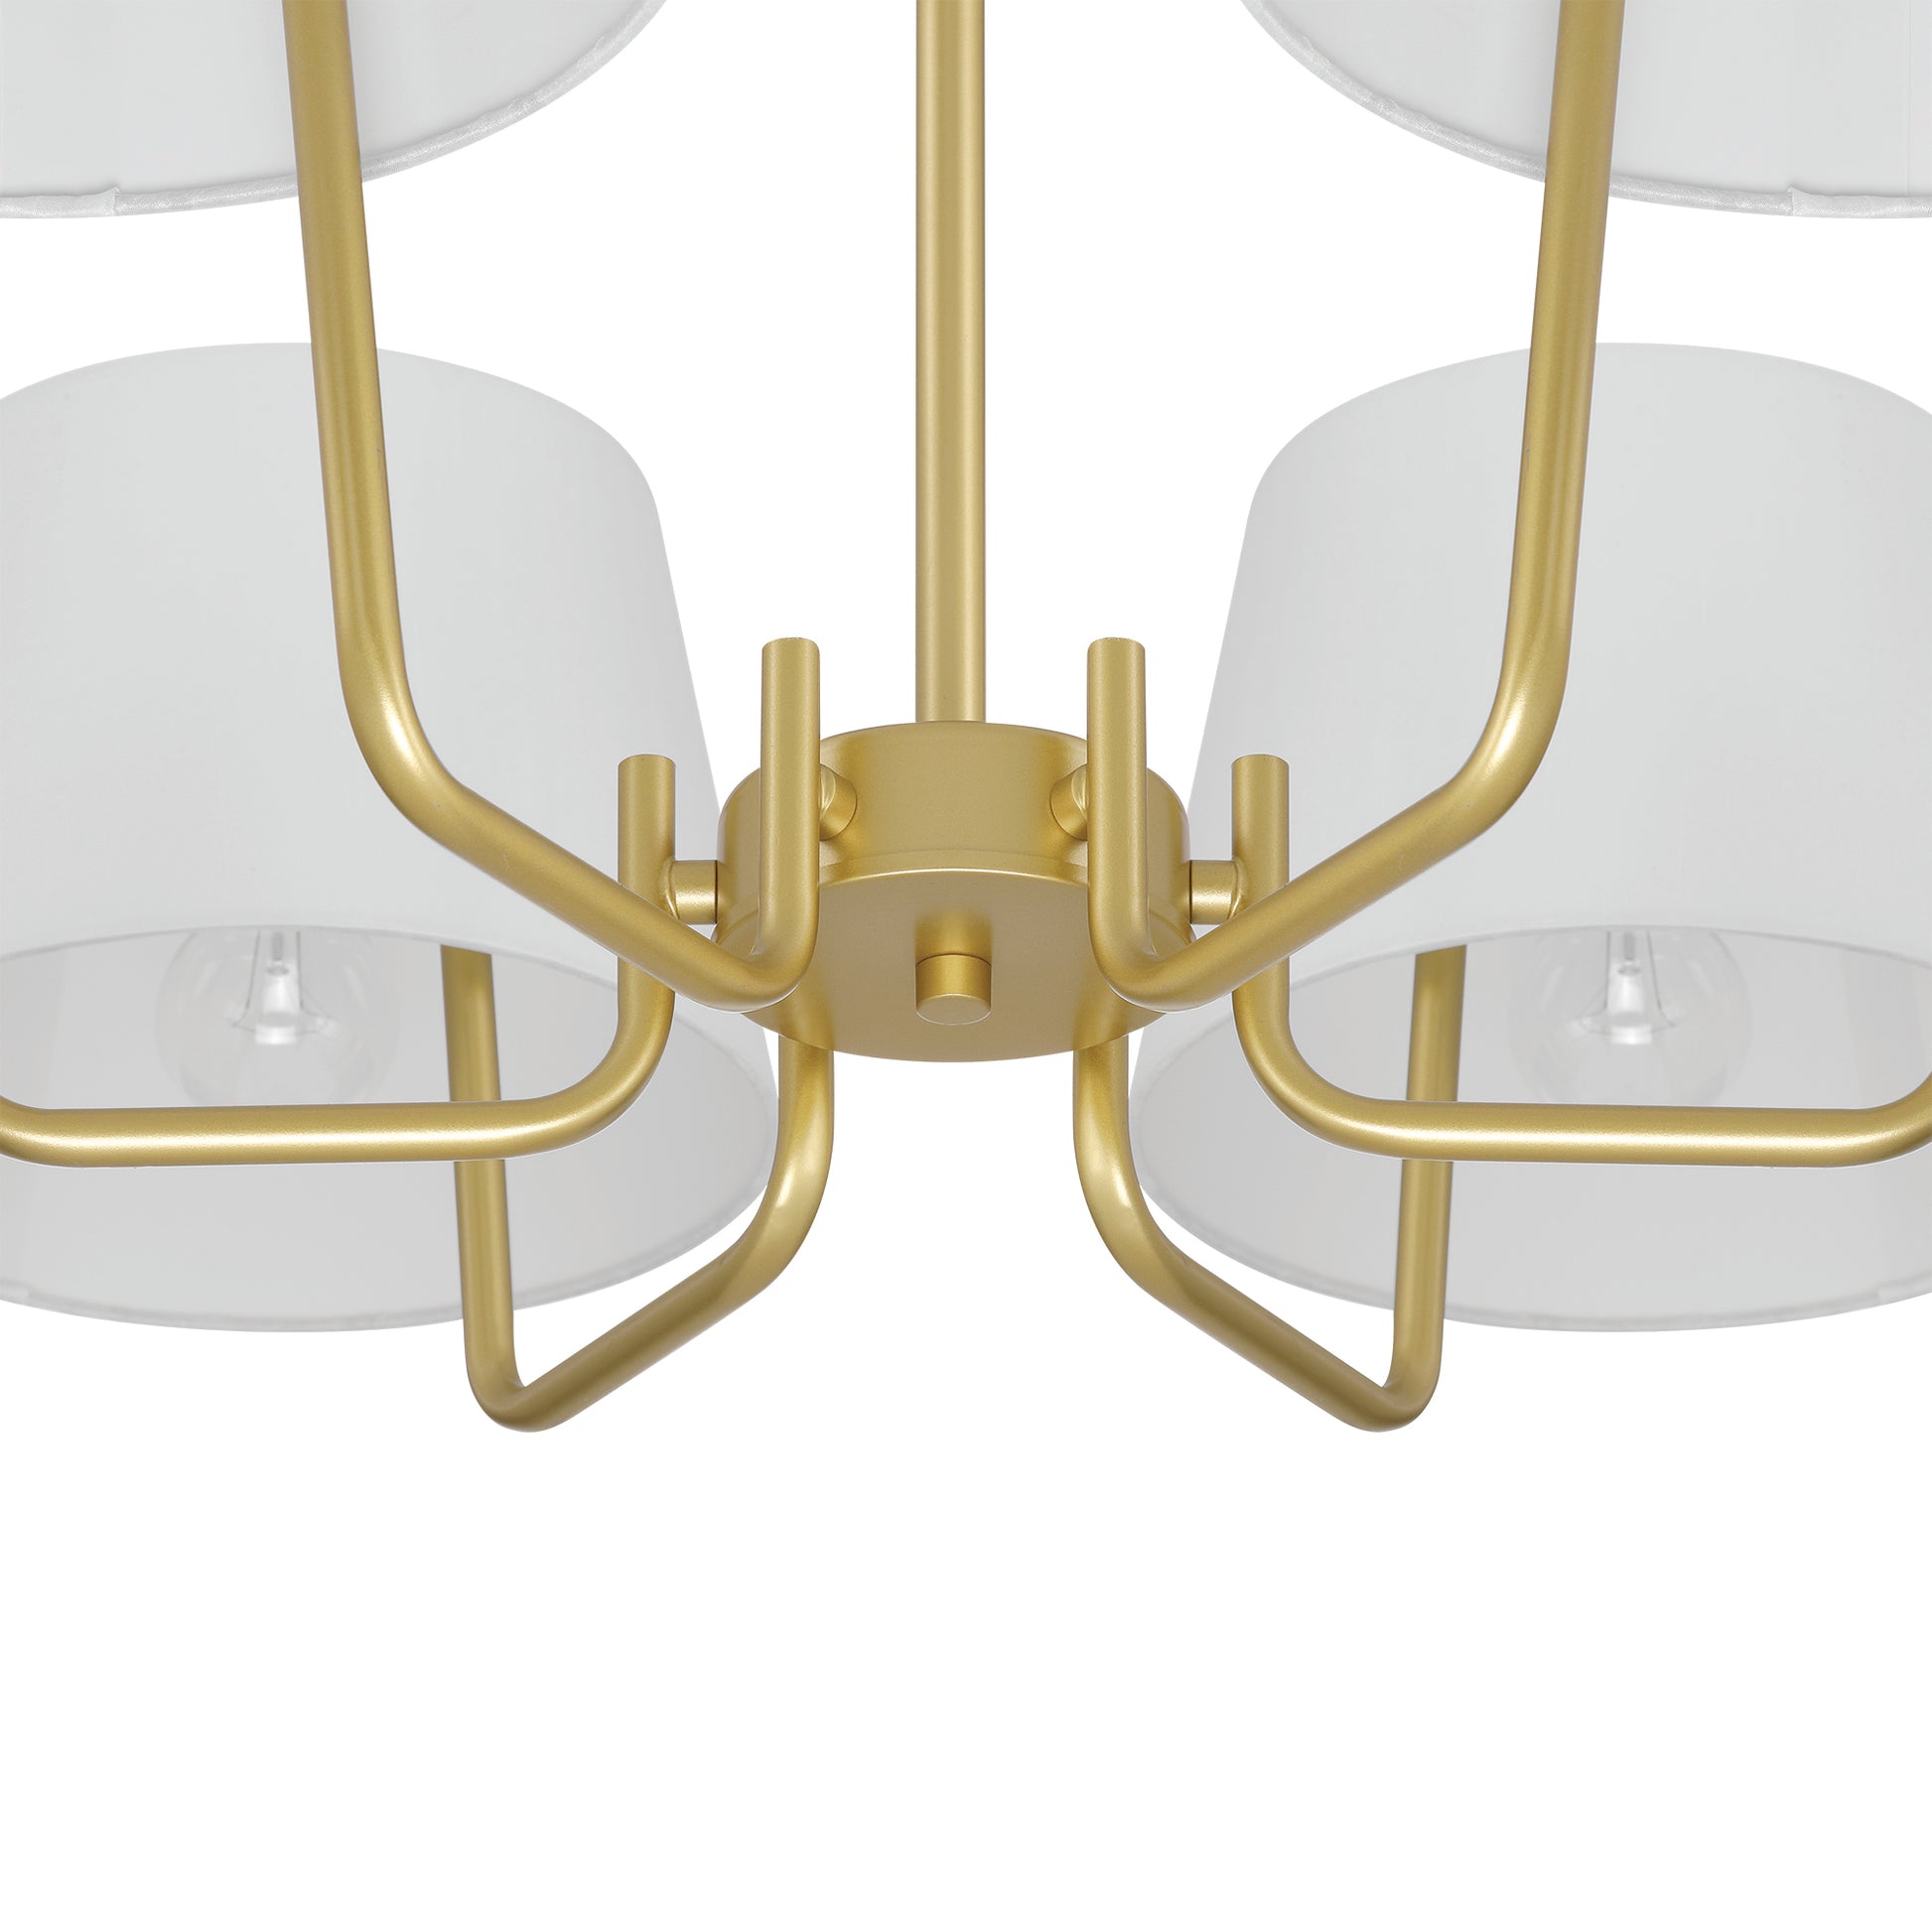 6 light classic traditional chandelier (8) by ACROMA